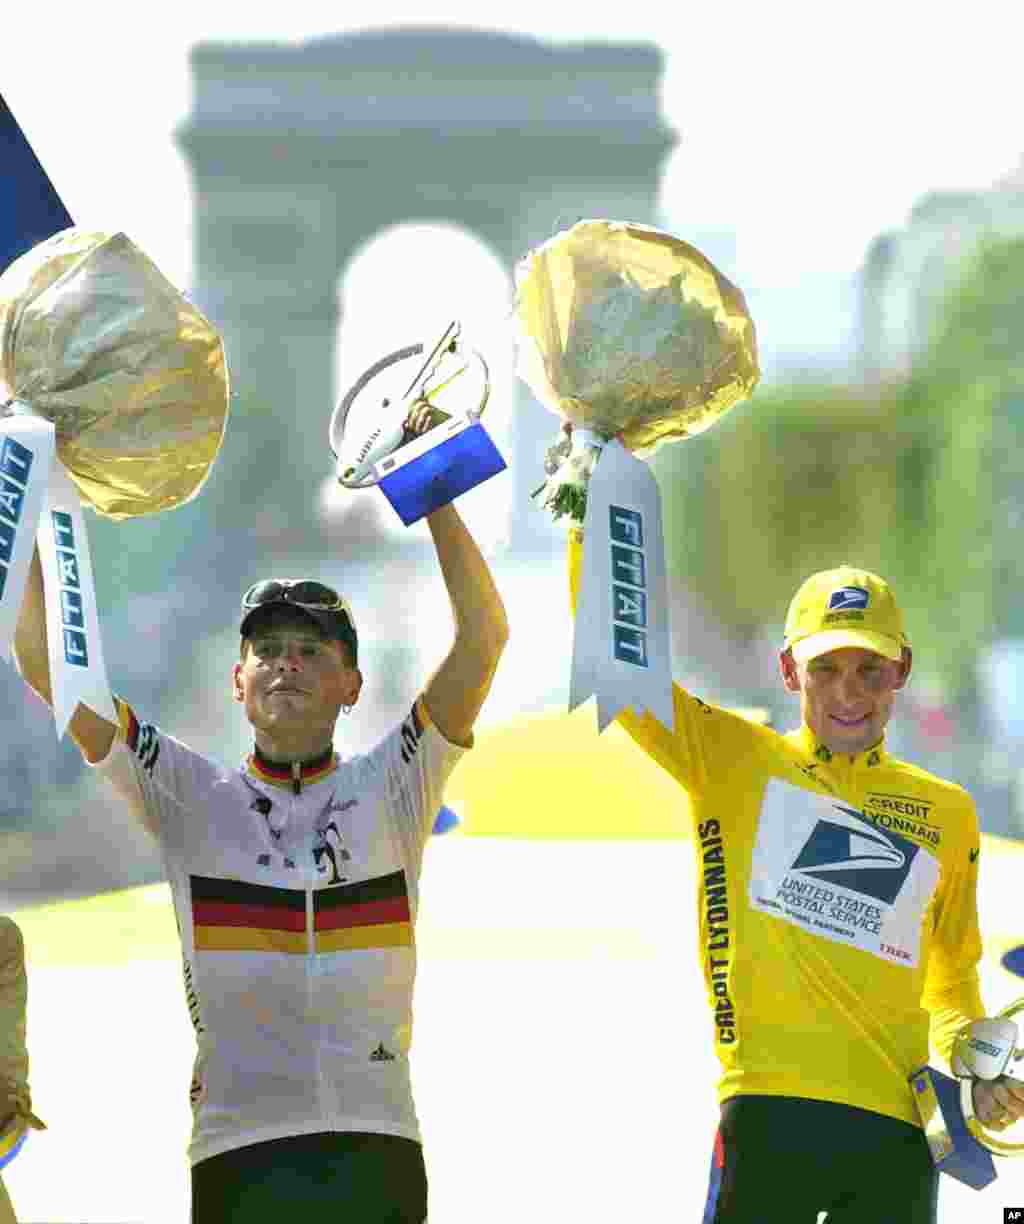 July 29, 2001: Lance Armstrong &nbsp;(right) on the podium next to second-placed Jan Ullrich of Germany, after winning the Tour de France for the third time.